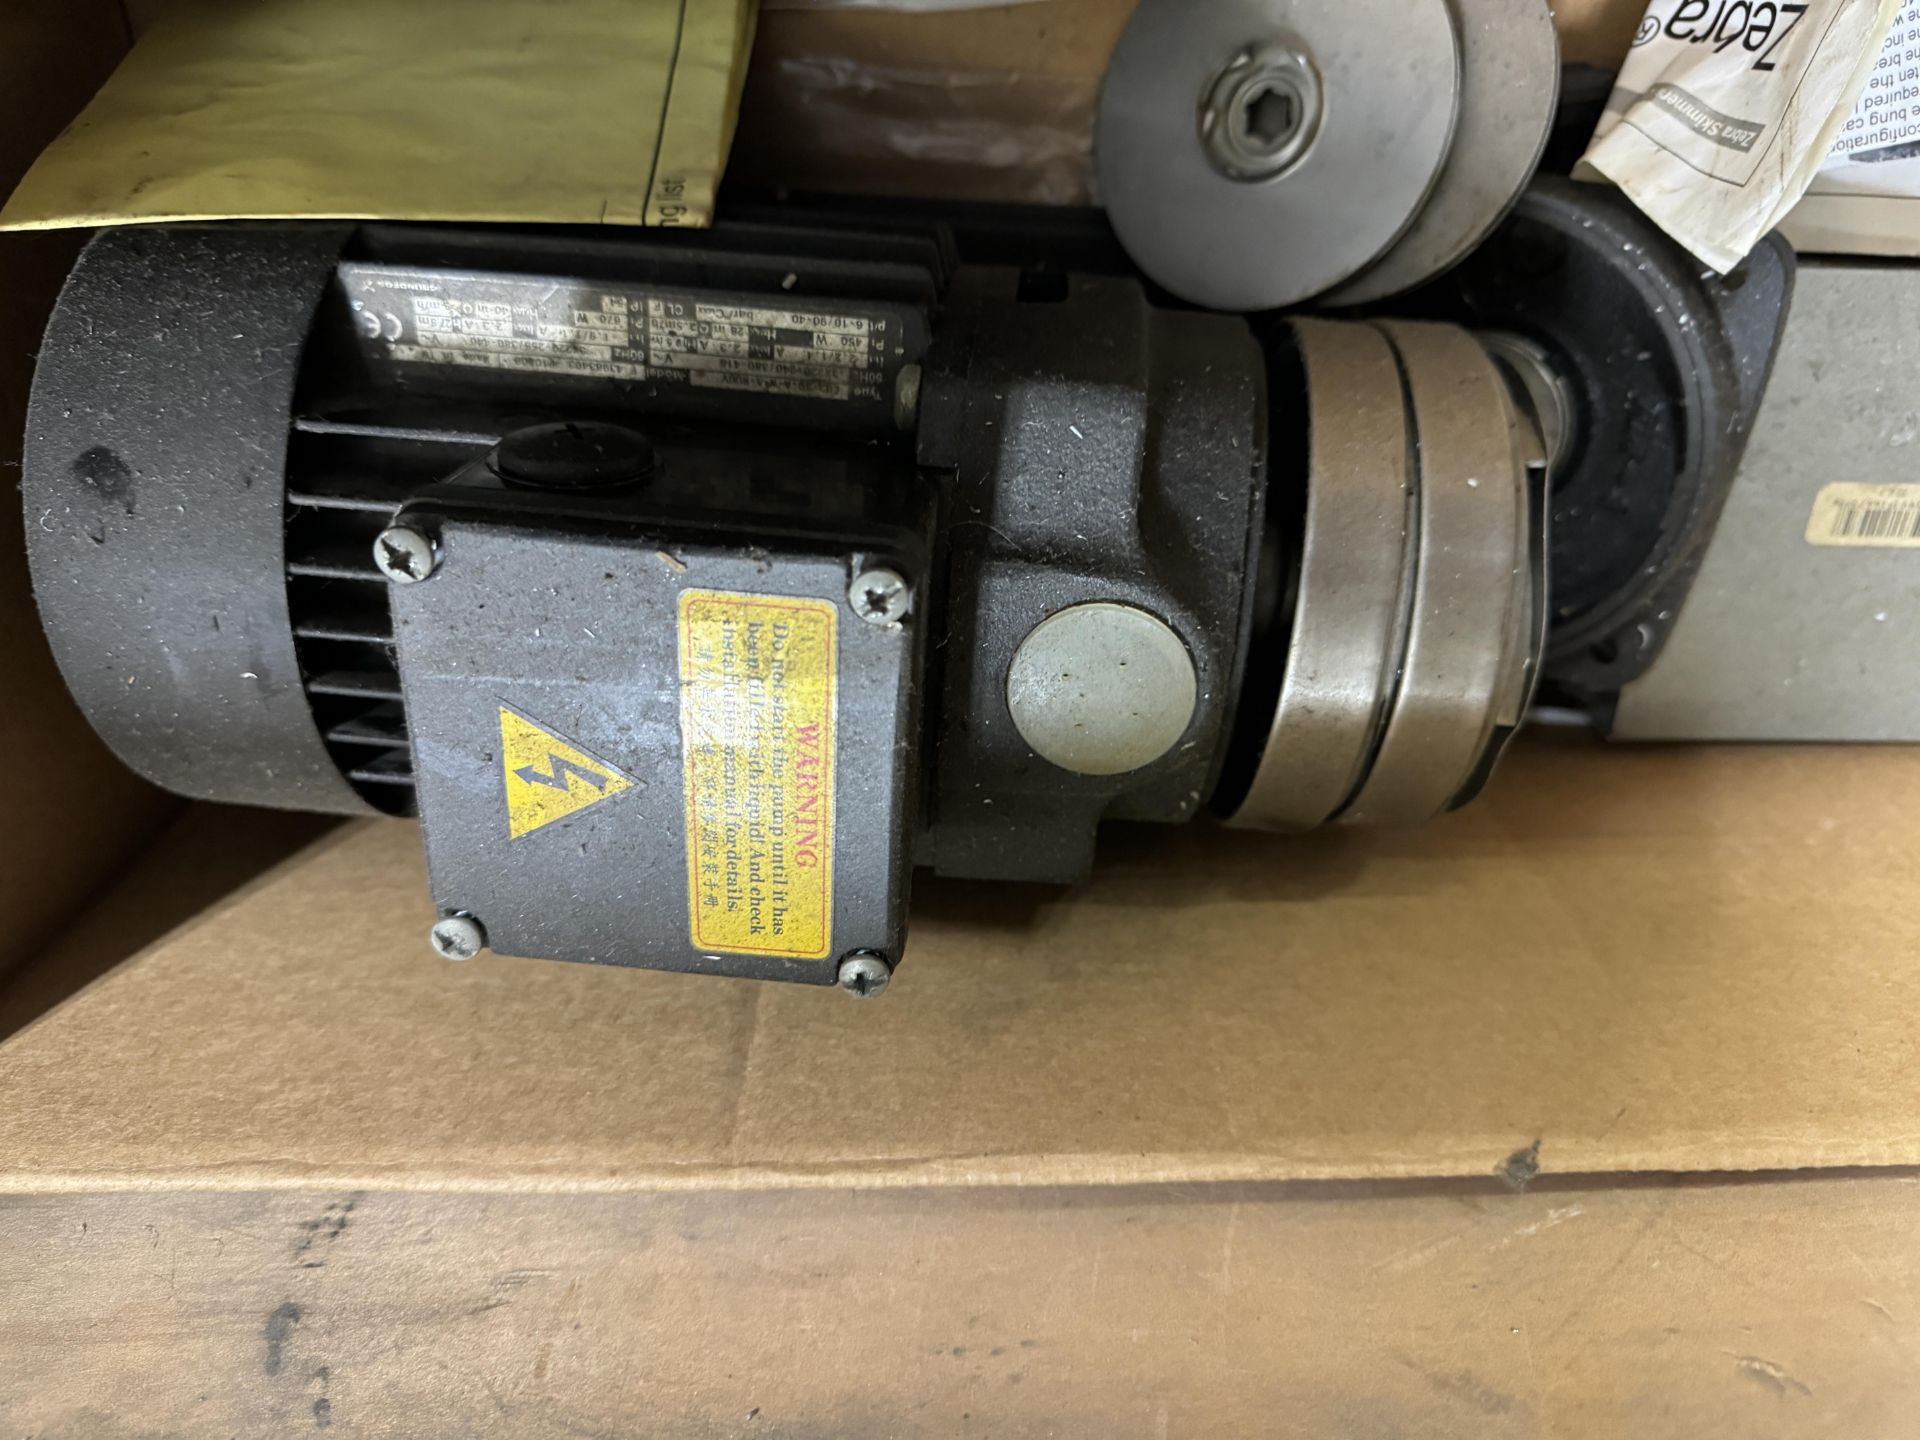 LOT (1) Grundfos Motor, (1) Gear Drive in Crate - Image 2 of 2